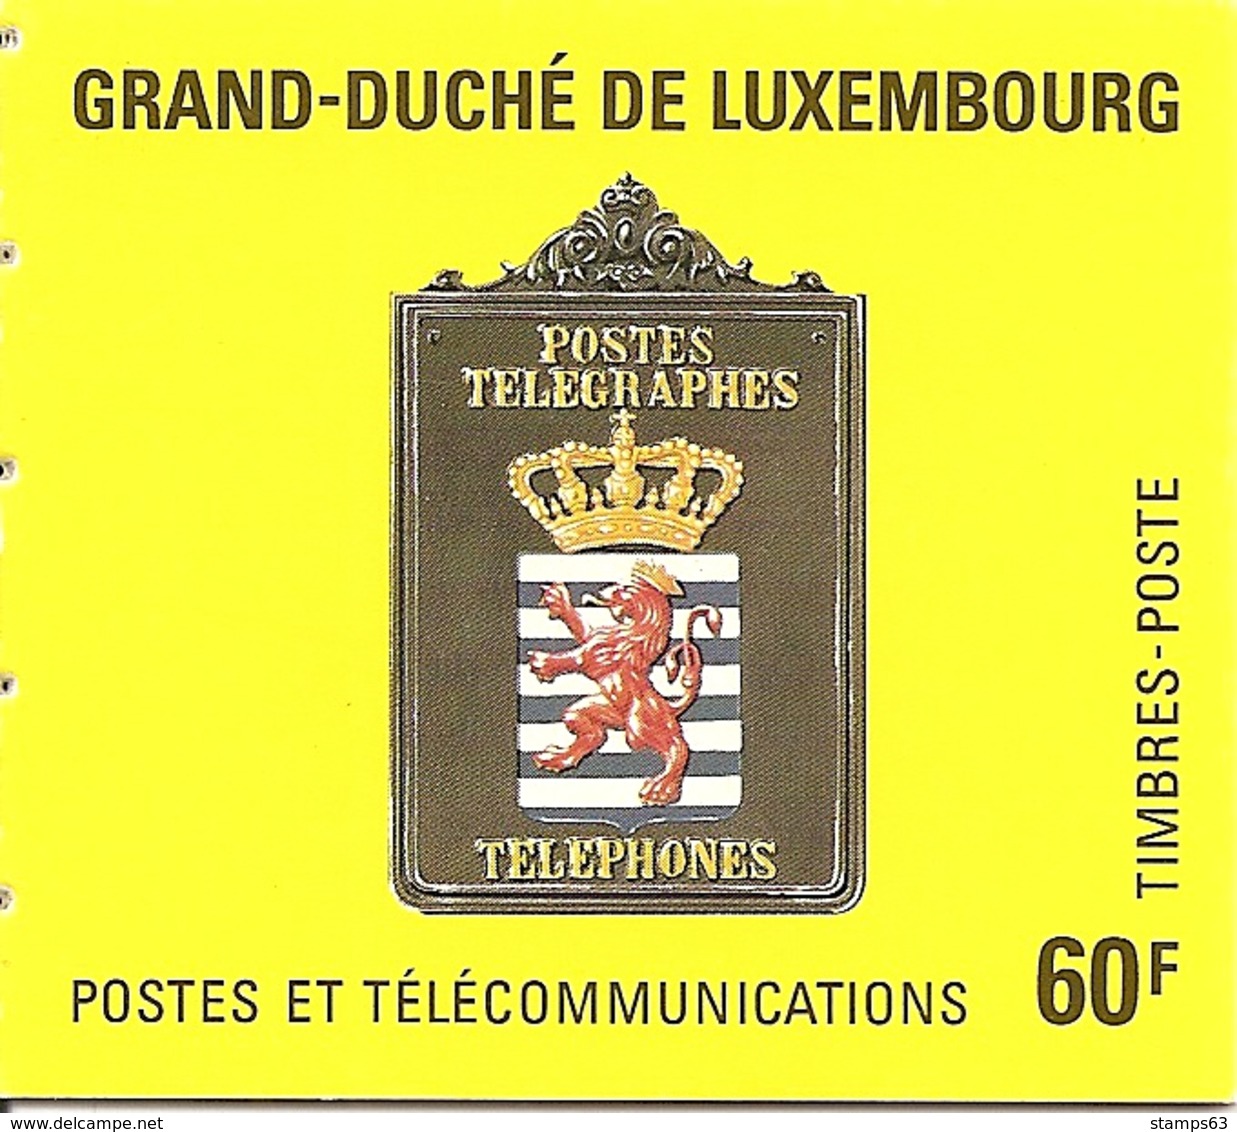 LUXEMBURG, 1991, Booklet 9, Historical Post And Telephone Equipment - Booklets